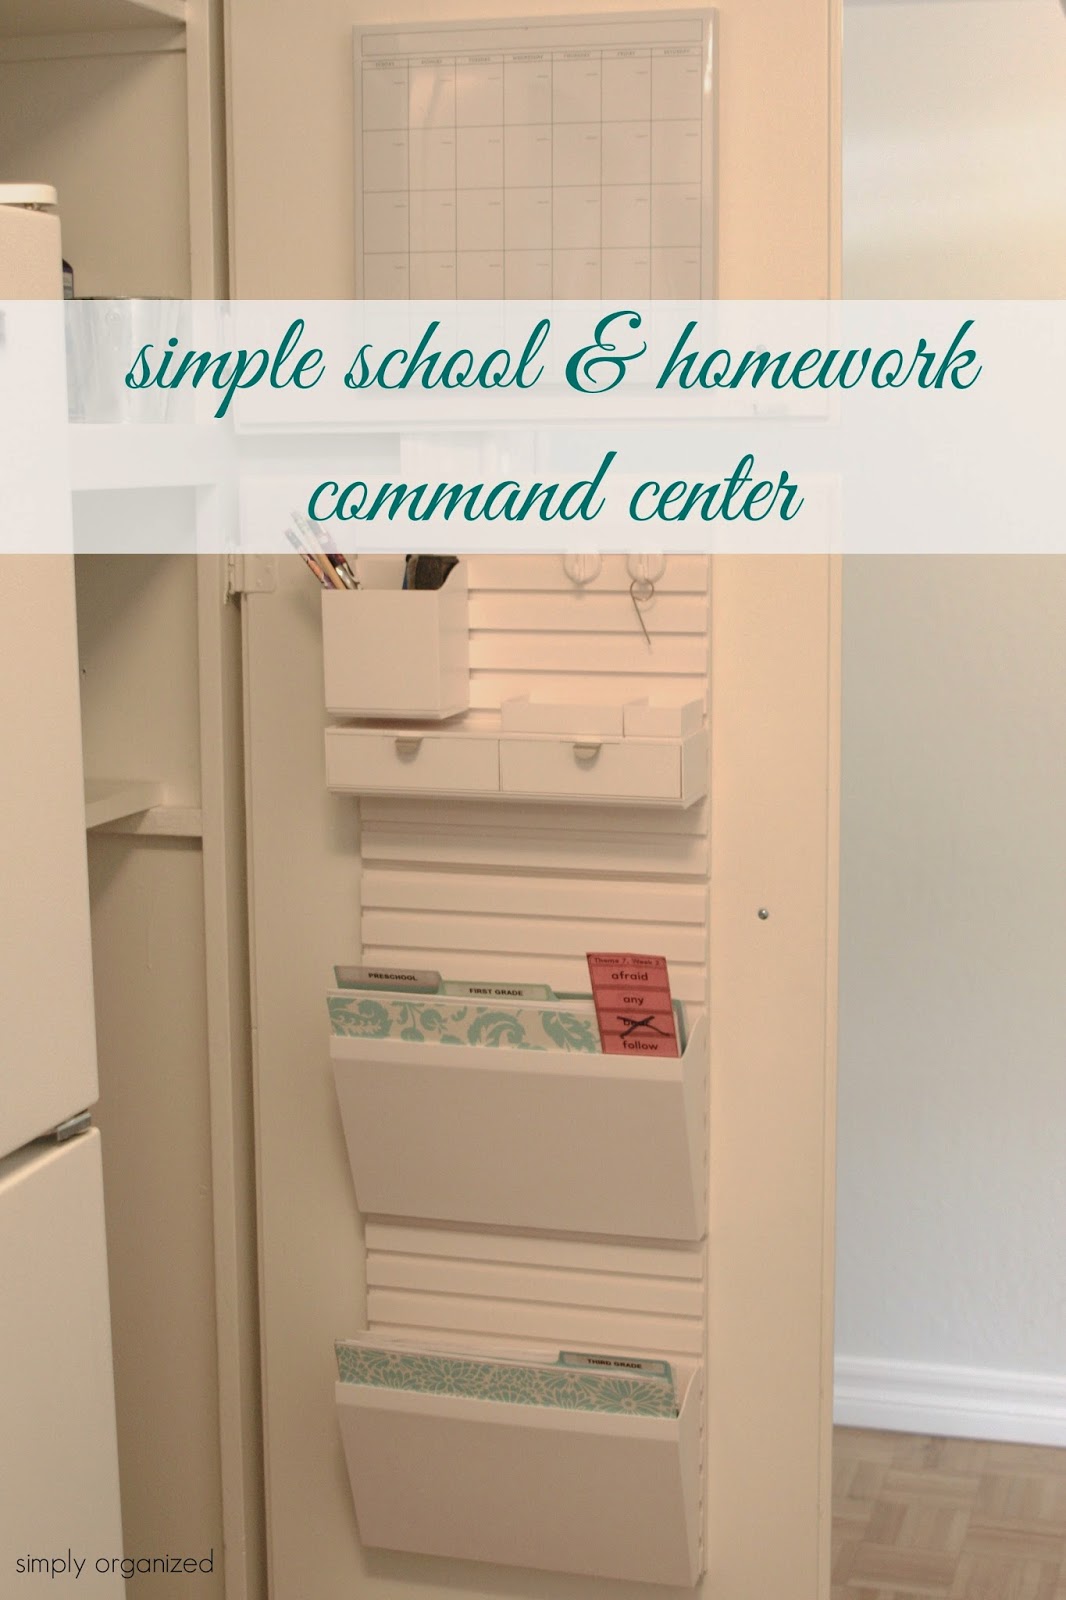 Simple school and homework command centre graphic.